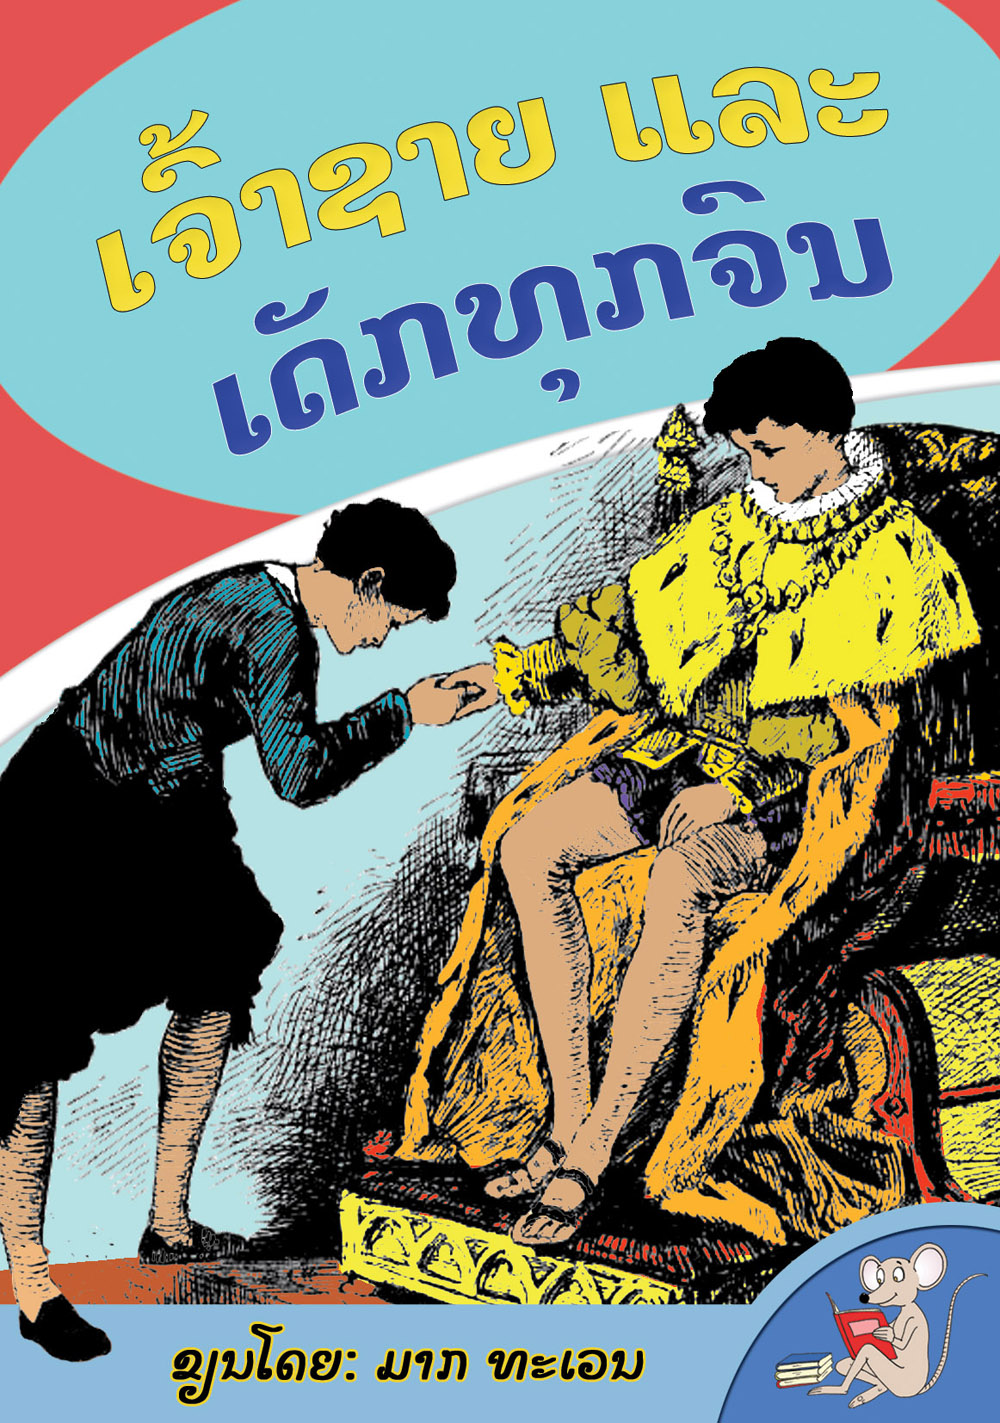 The Prince and the Pauper large book cover, published in Lao language